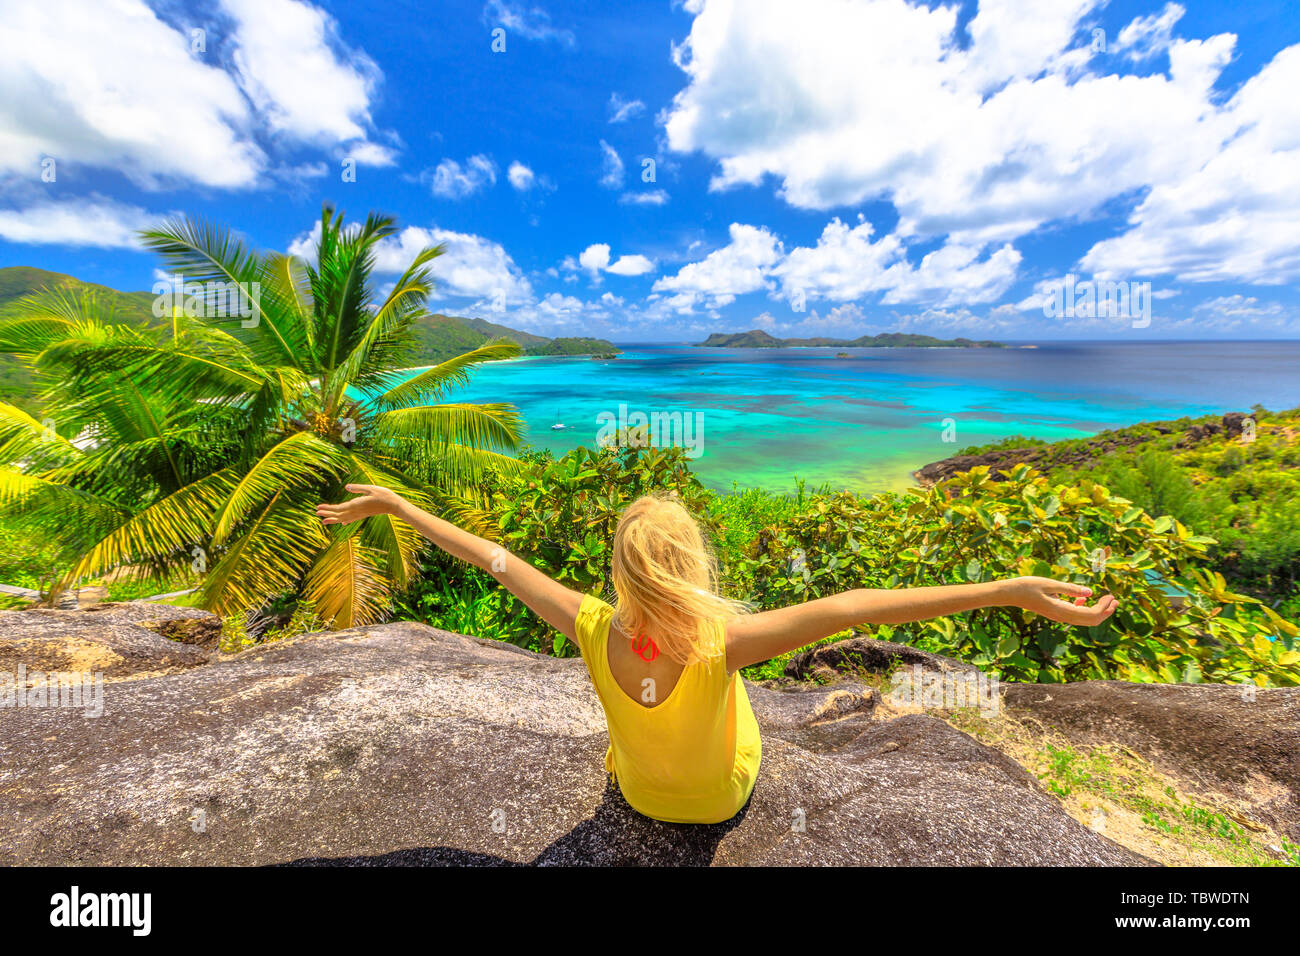 Top view panorama of Praslin, Seychelles. Carefree woman in yellow dress enjoying amazing views of Anse of Gouvernement overlooking Cote d'Or Bay with Stock Photo